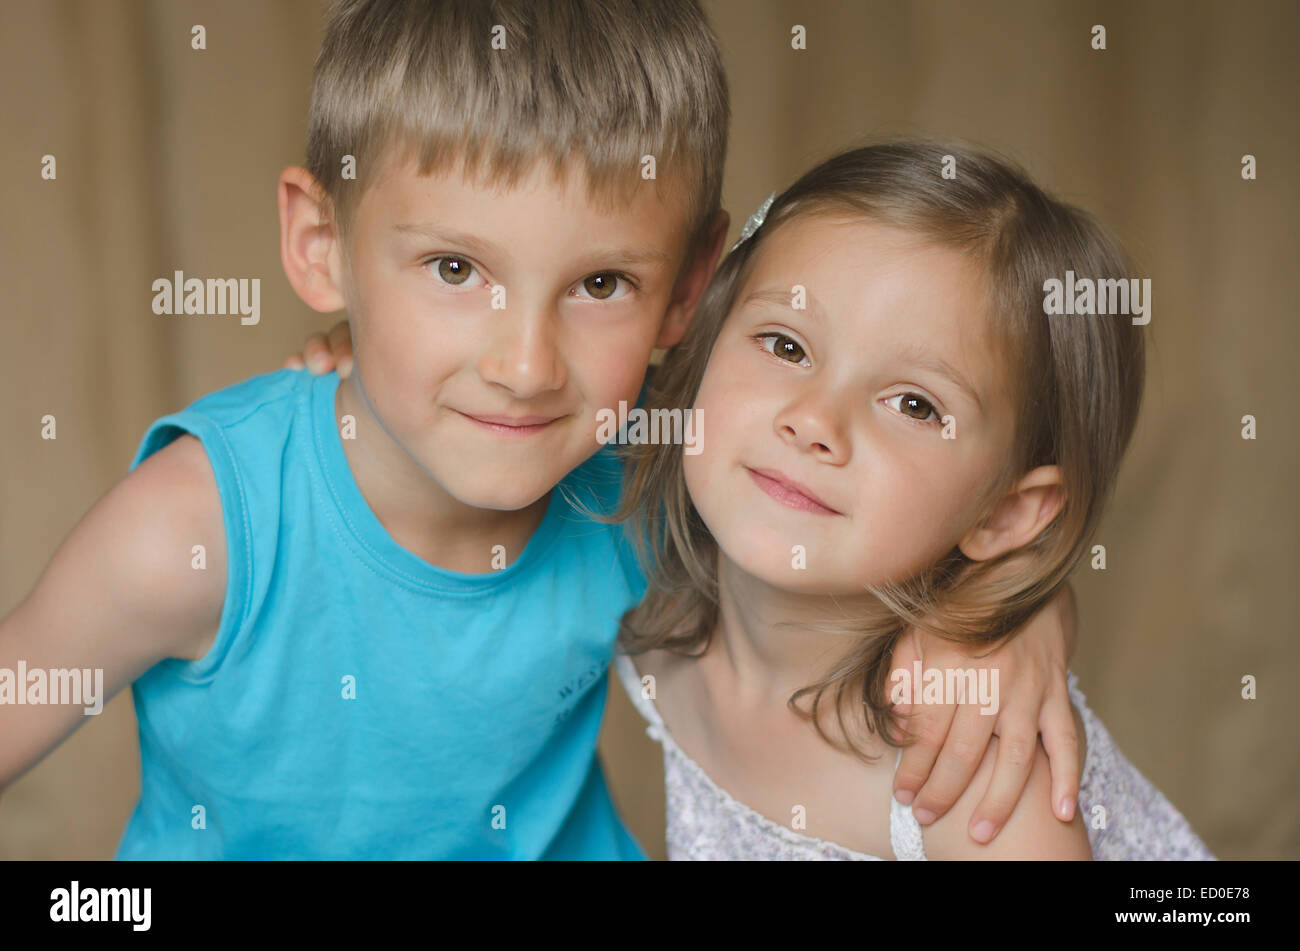 Portrait of brother and sister smiling Stock Photo